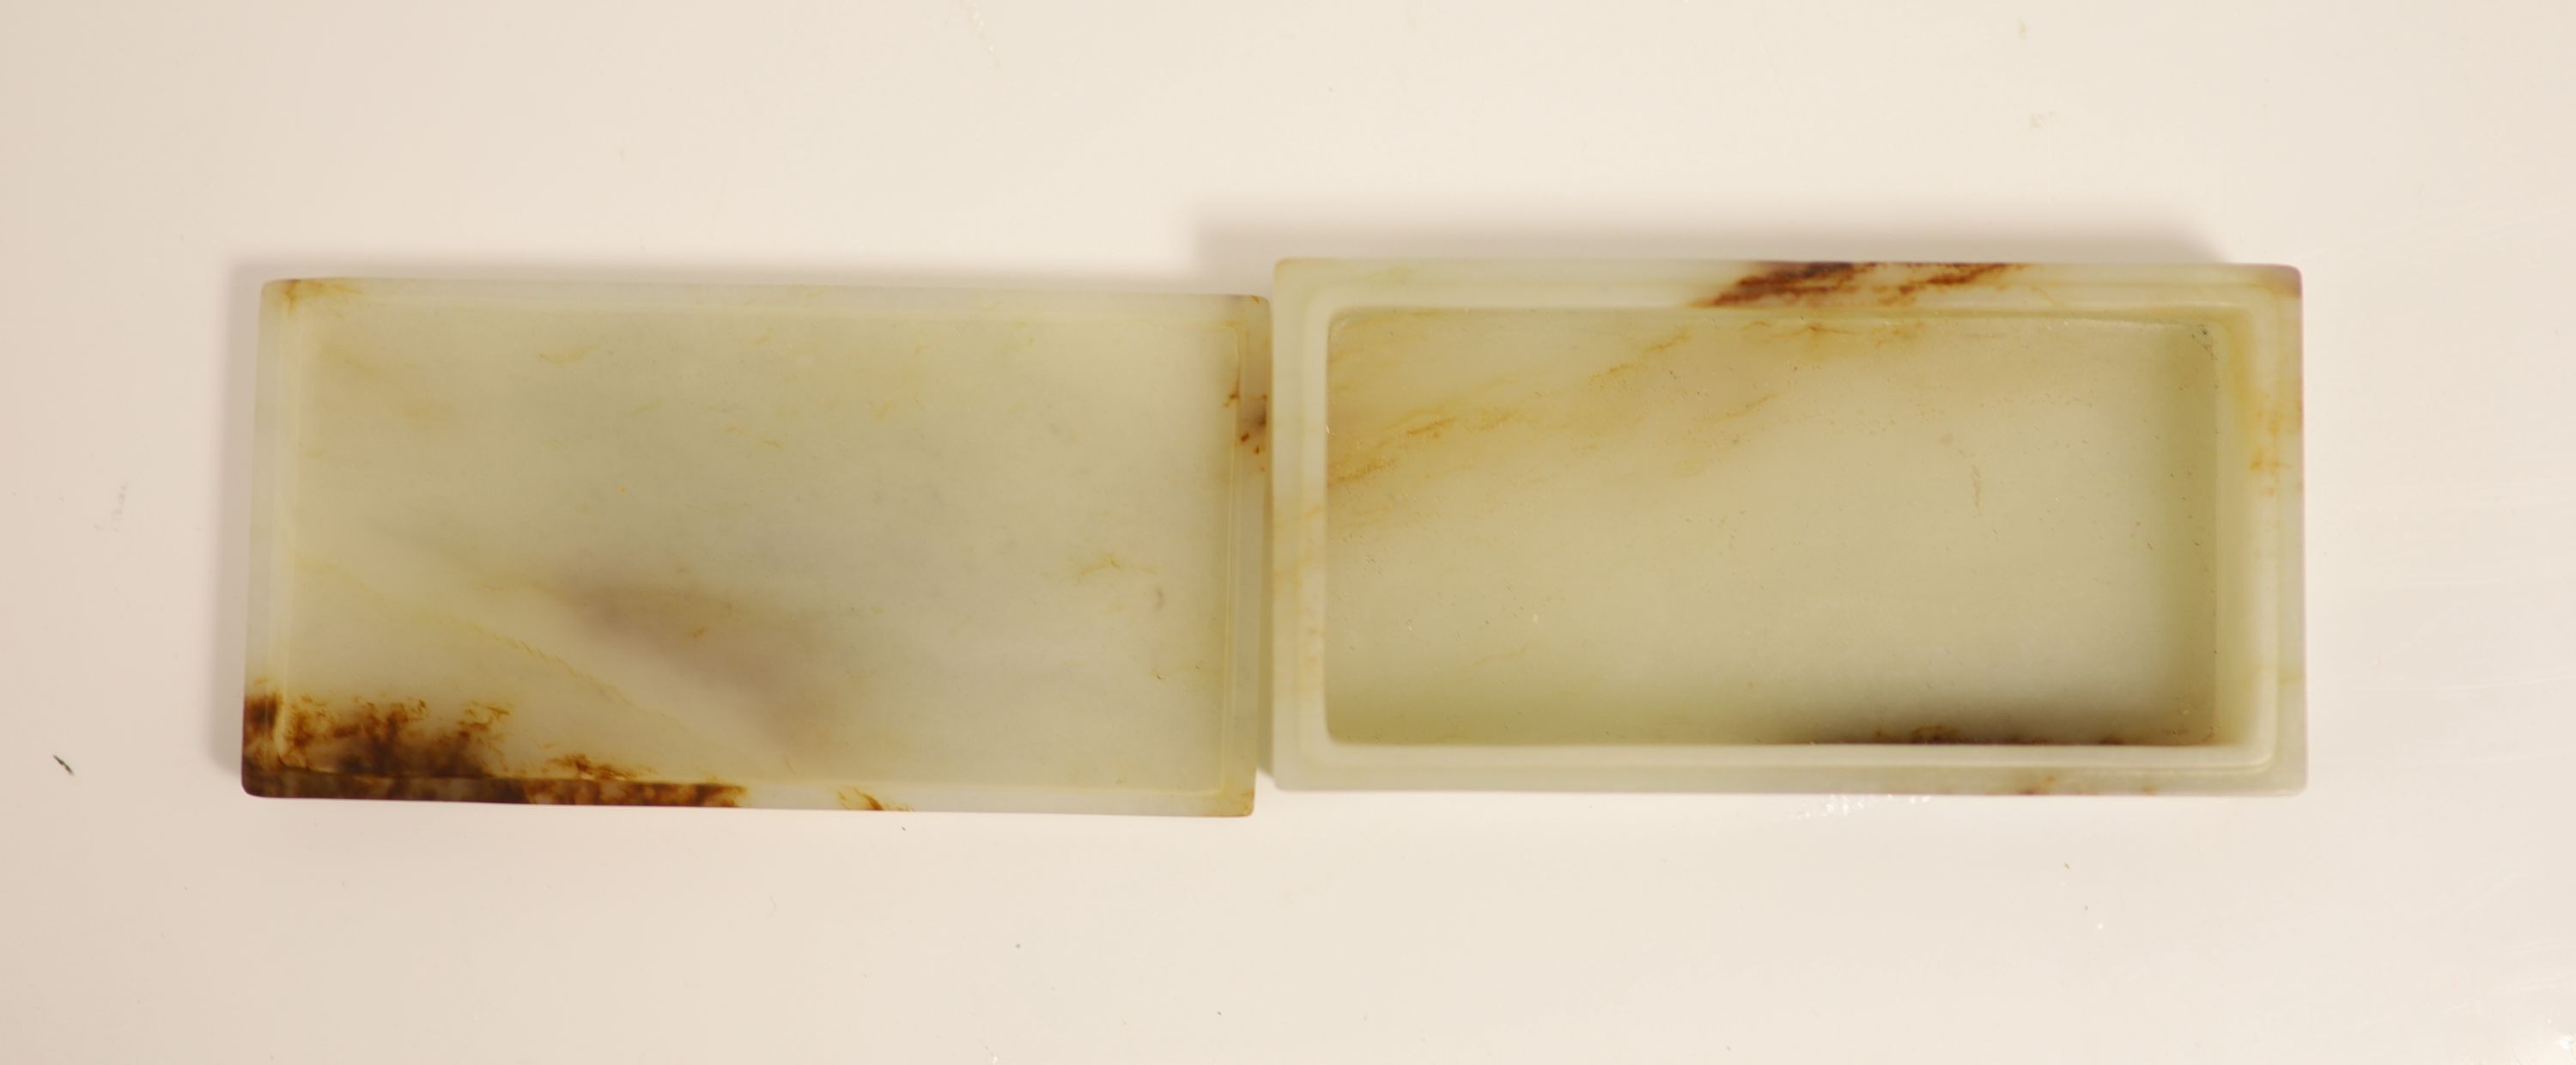 A Chinese archaistic white and brown jade box and cover, 8.3 x 4.3 cm